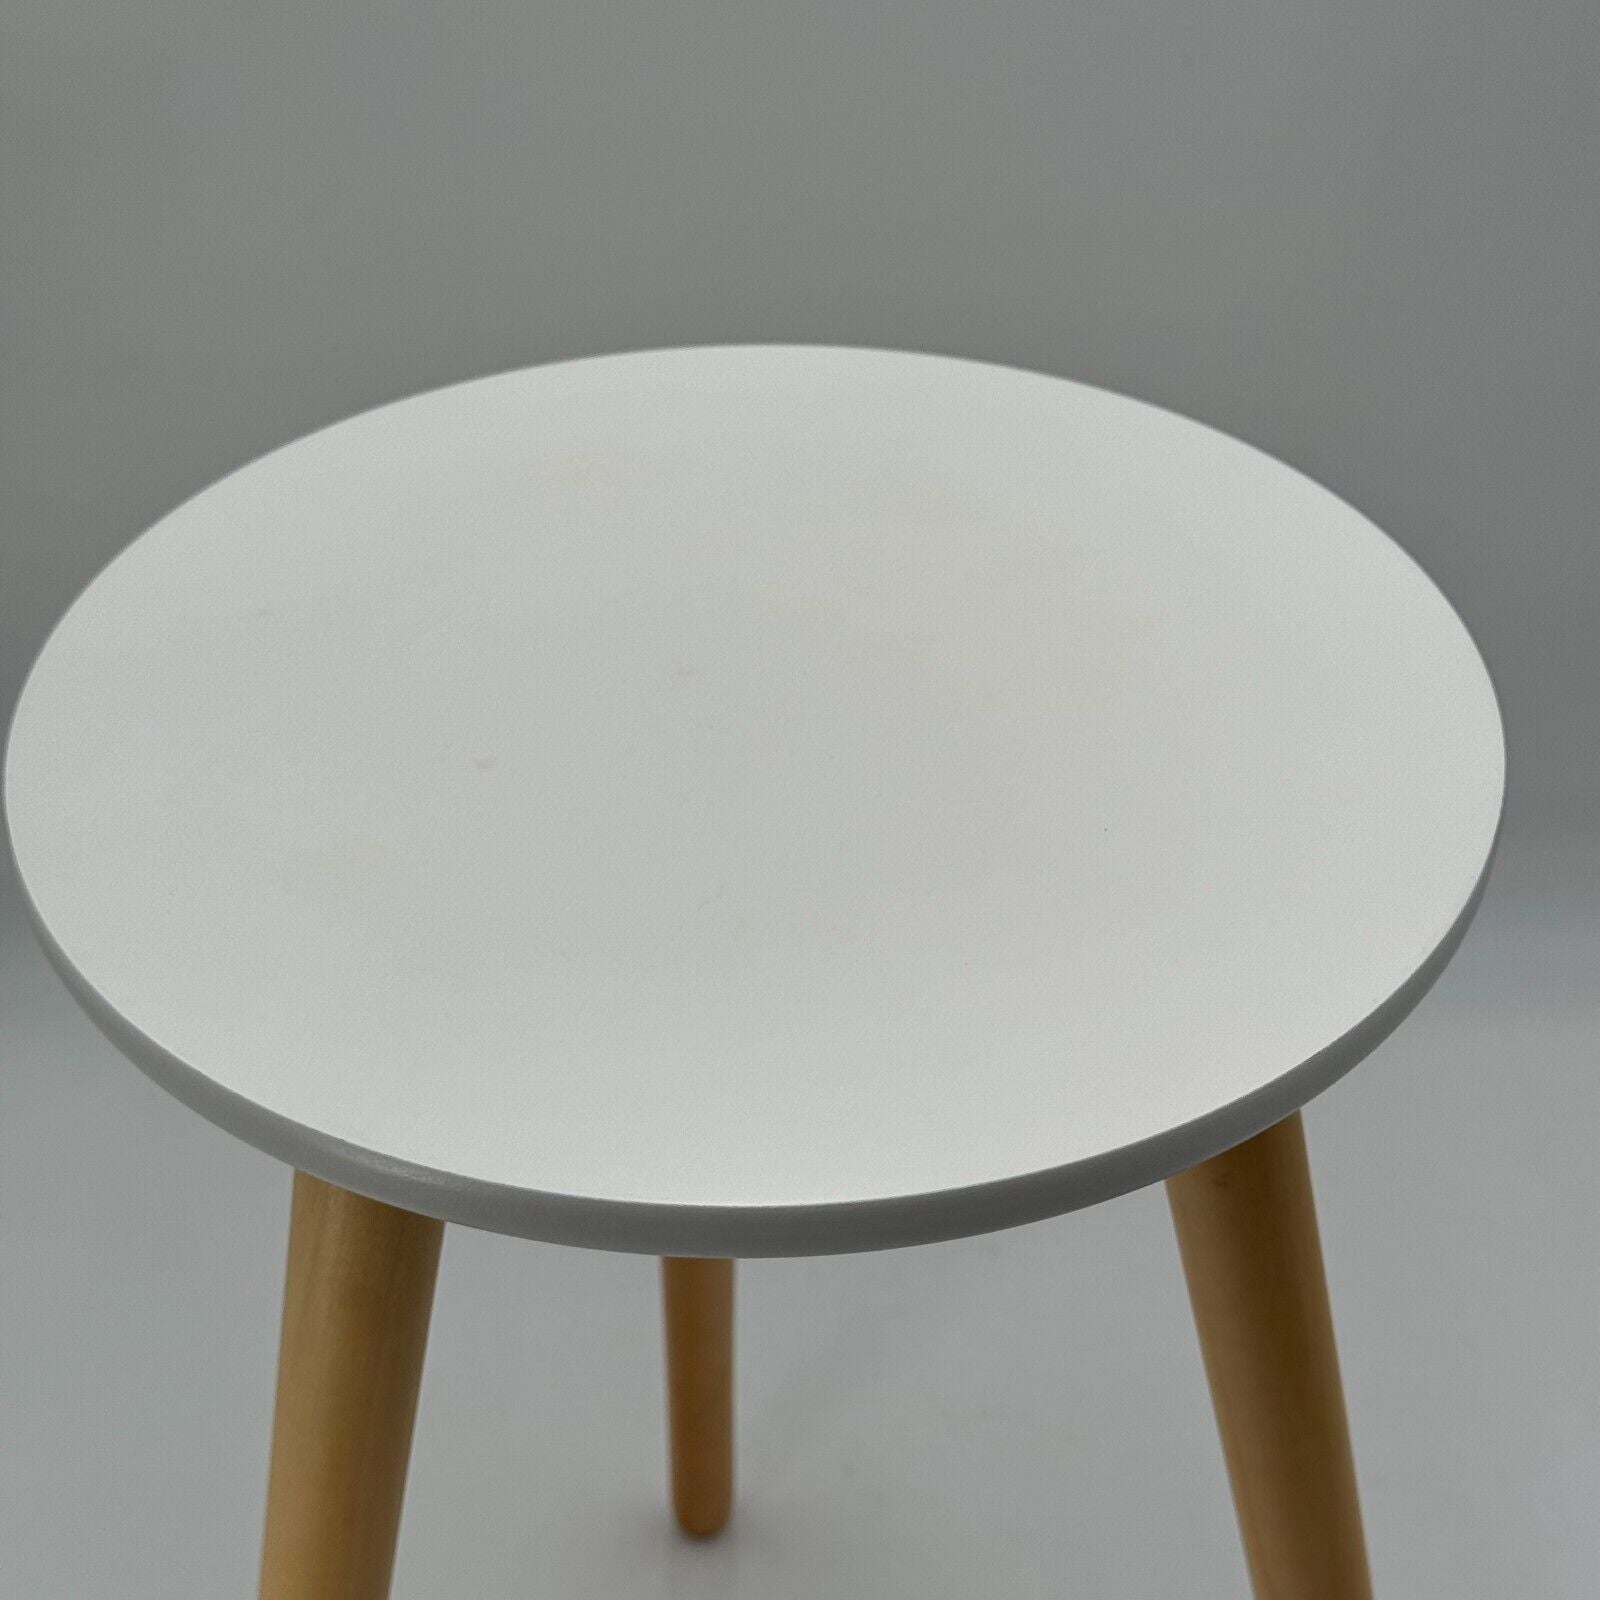 End Table White Round Top 3 Light Stained Wood Legs Screw In Easy Assembly